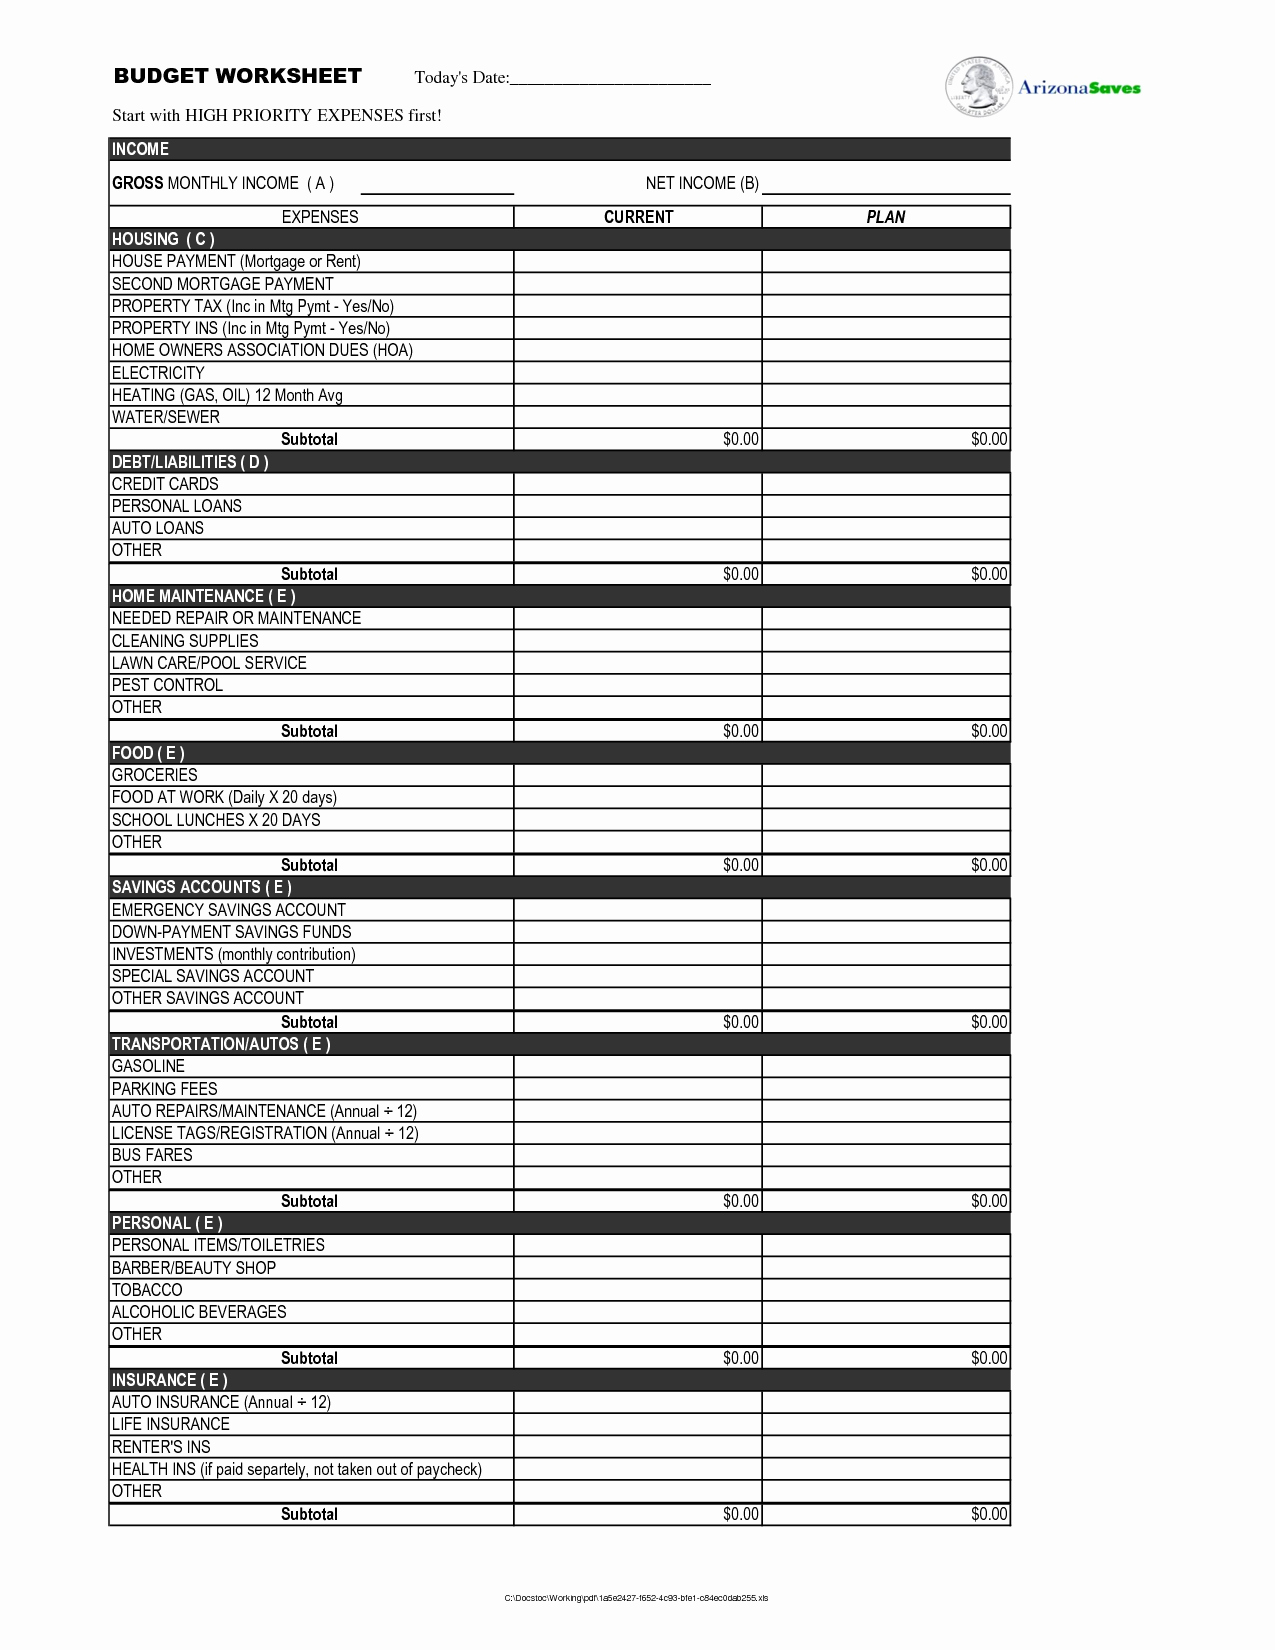 Church event Planning Worksheet Best Of 19 Best Of Sample Church Bud Worksheet Monthly In E Expense Worksheet Vacation